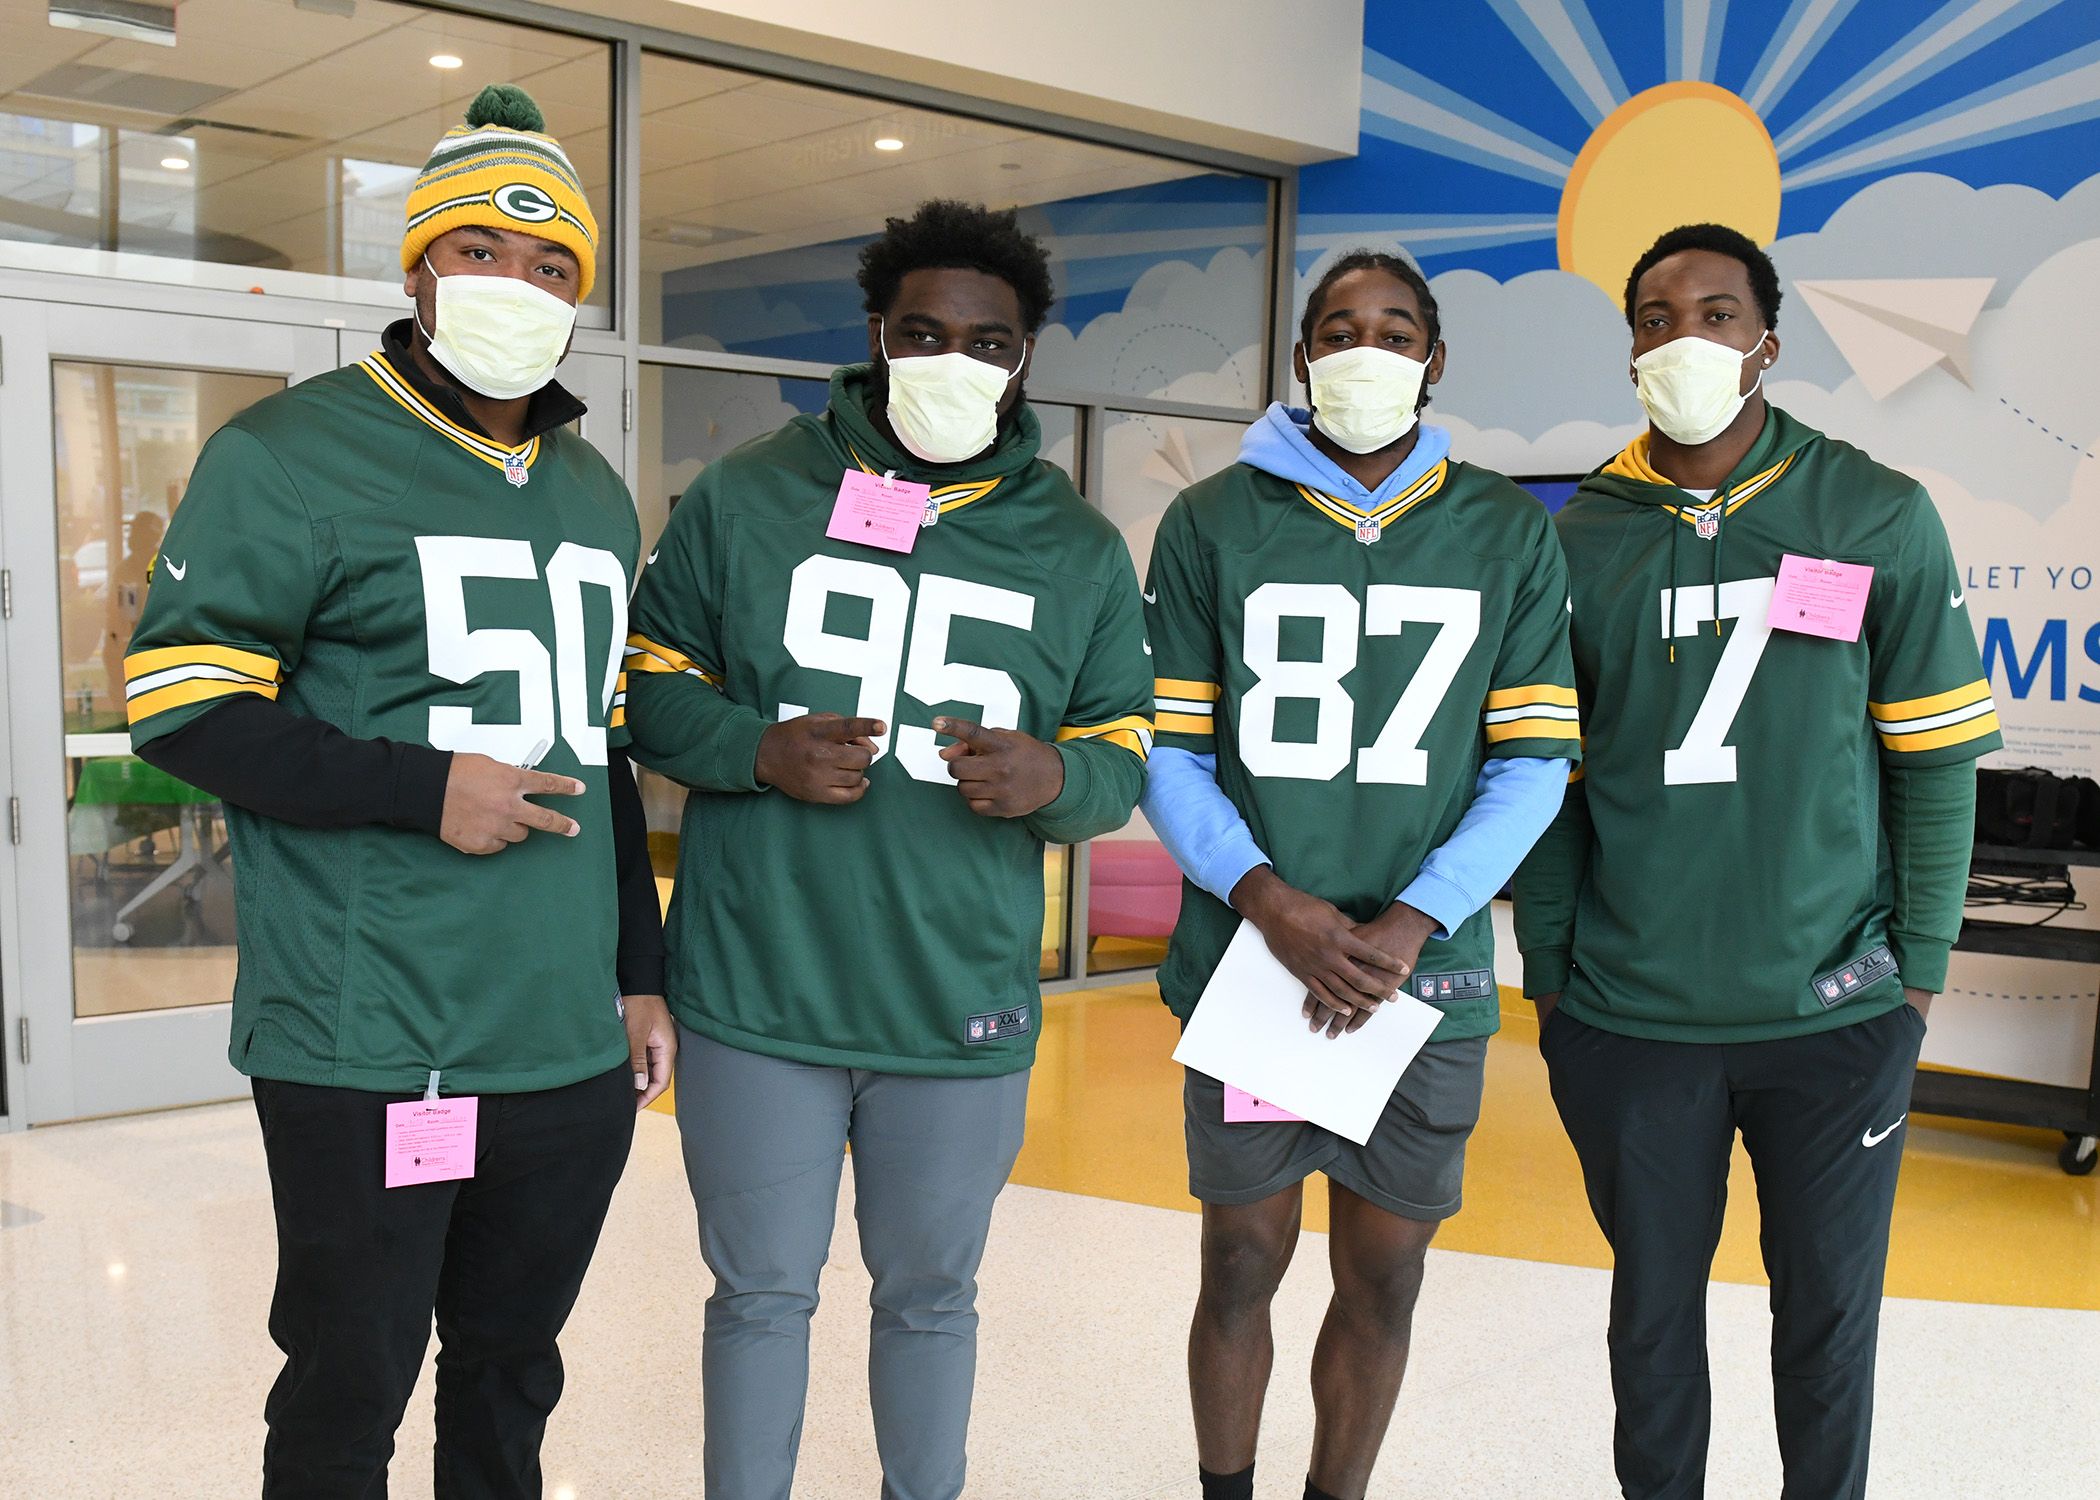 Packers players visited patients and families at Children’s Wisconsin today